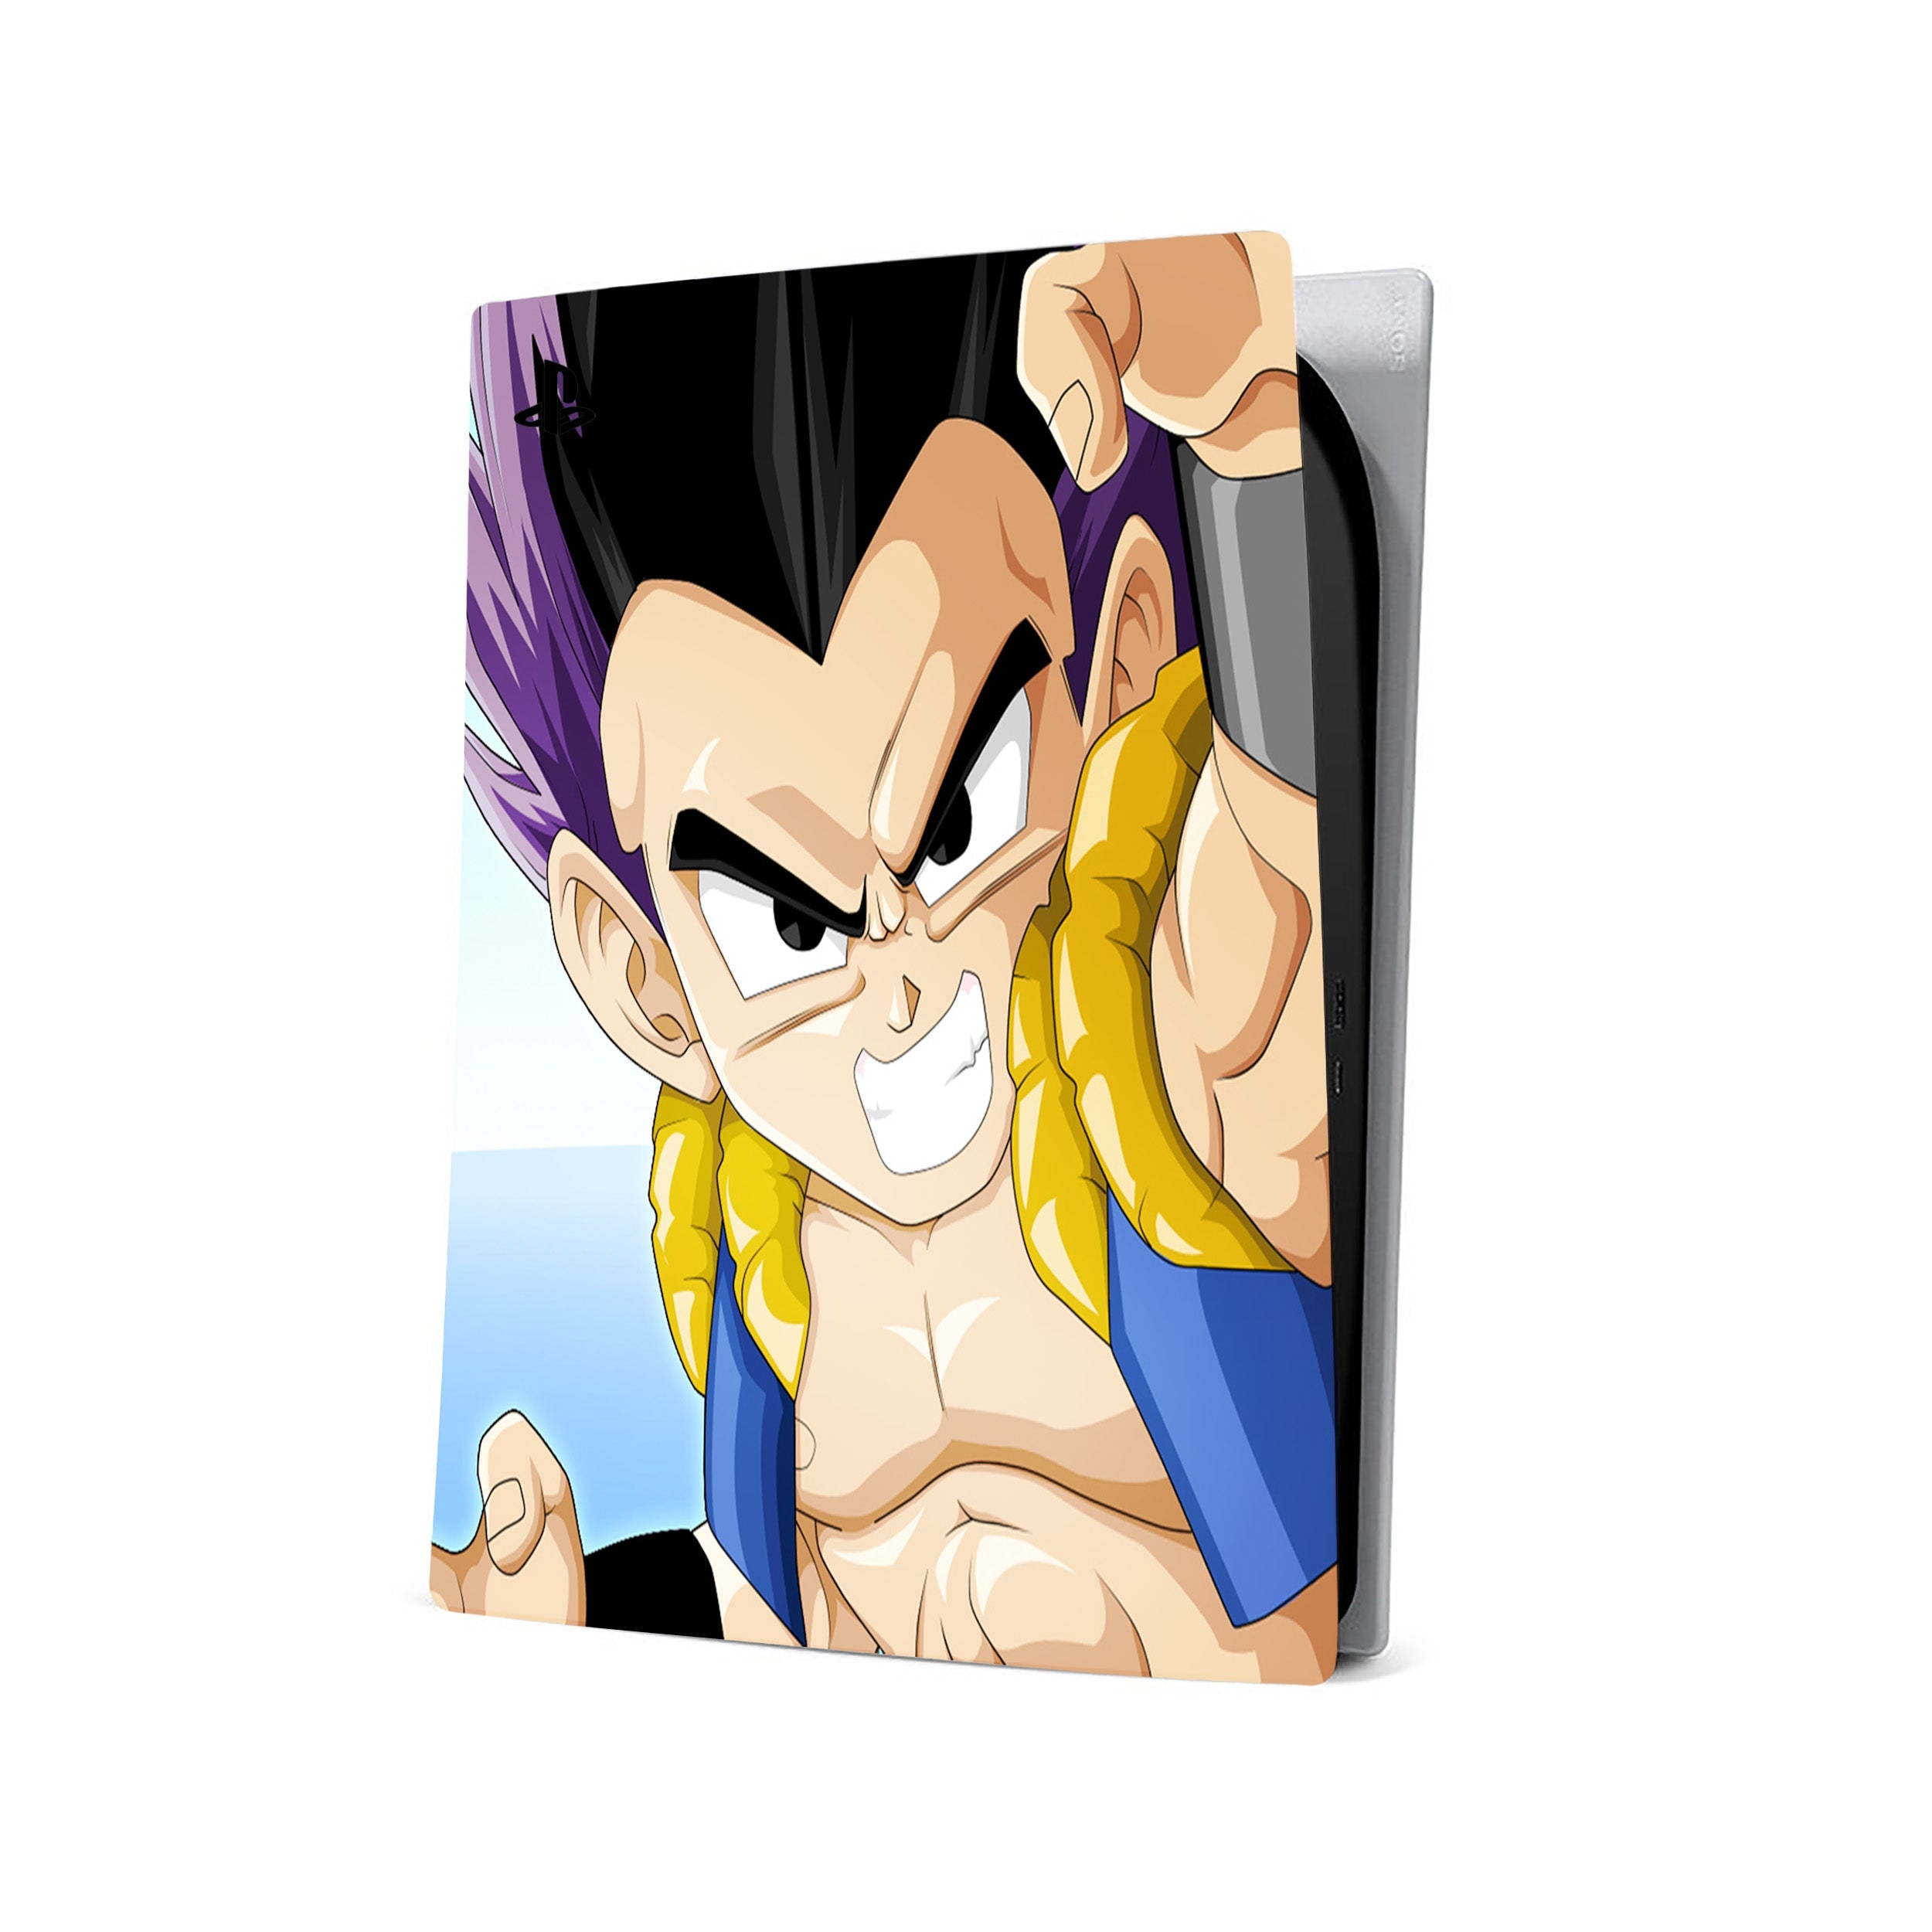 A video game skin featuring a Dragon Ball Super Gotenks design for the PS5.